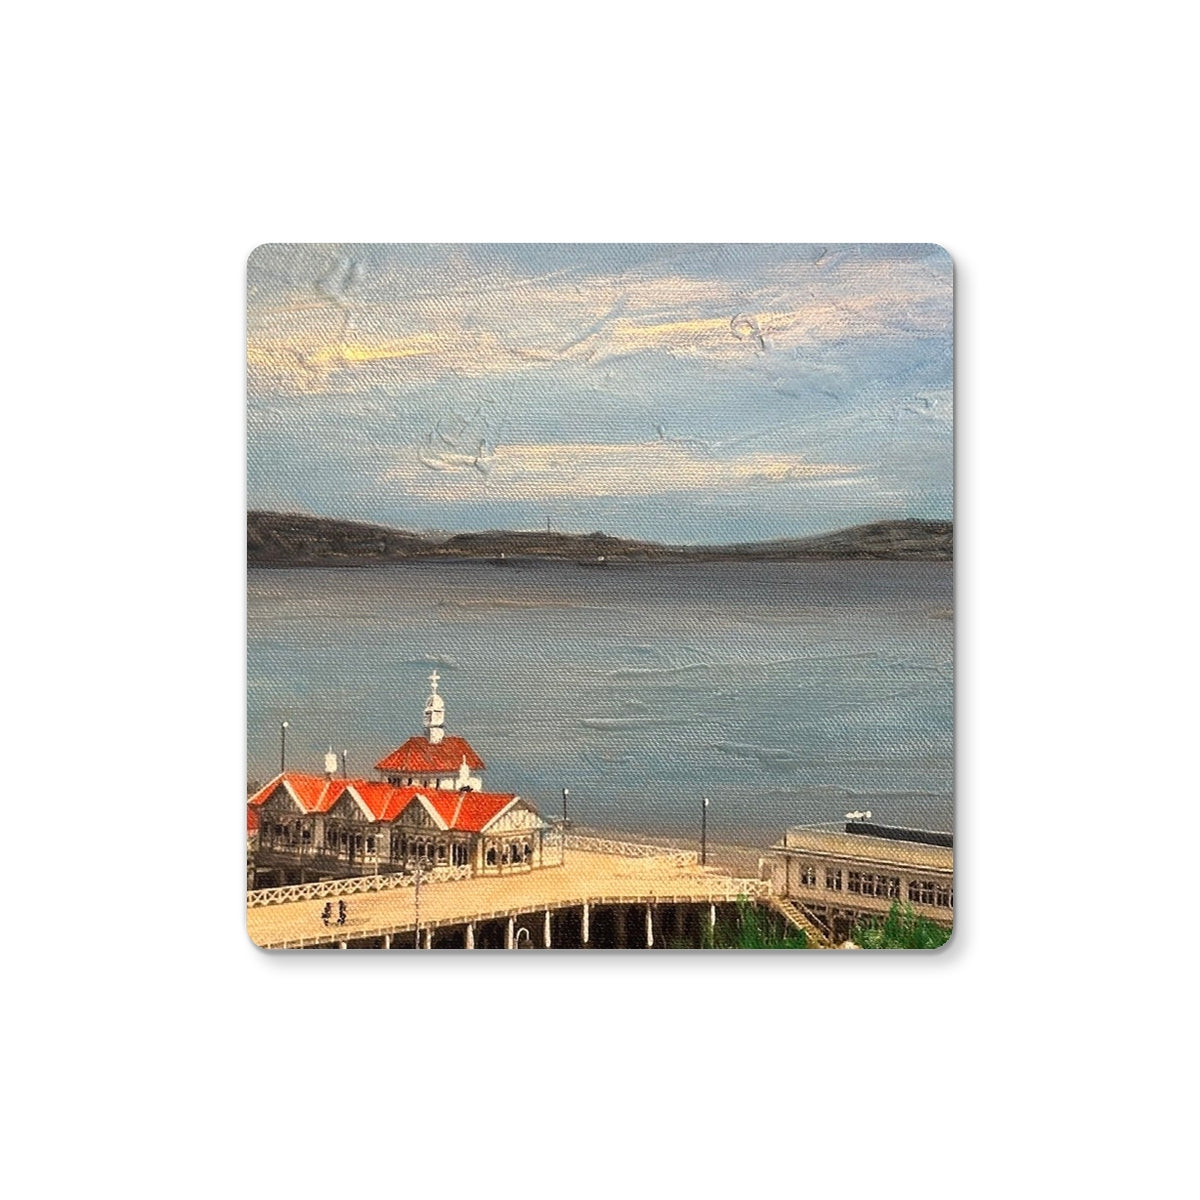 Looking From Dunoon Art Gifts Coaster-Homeware-River Clyde Art Gallery-Single Coaster-Paintings, Prints, Homeware, Art Gifts From Scotland By Scottish Artist Kevin Hunter